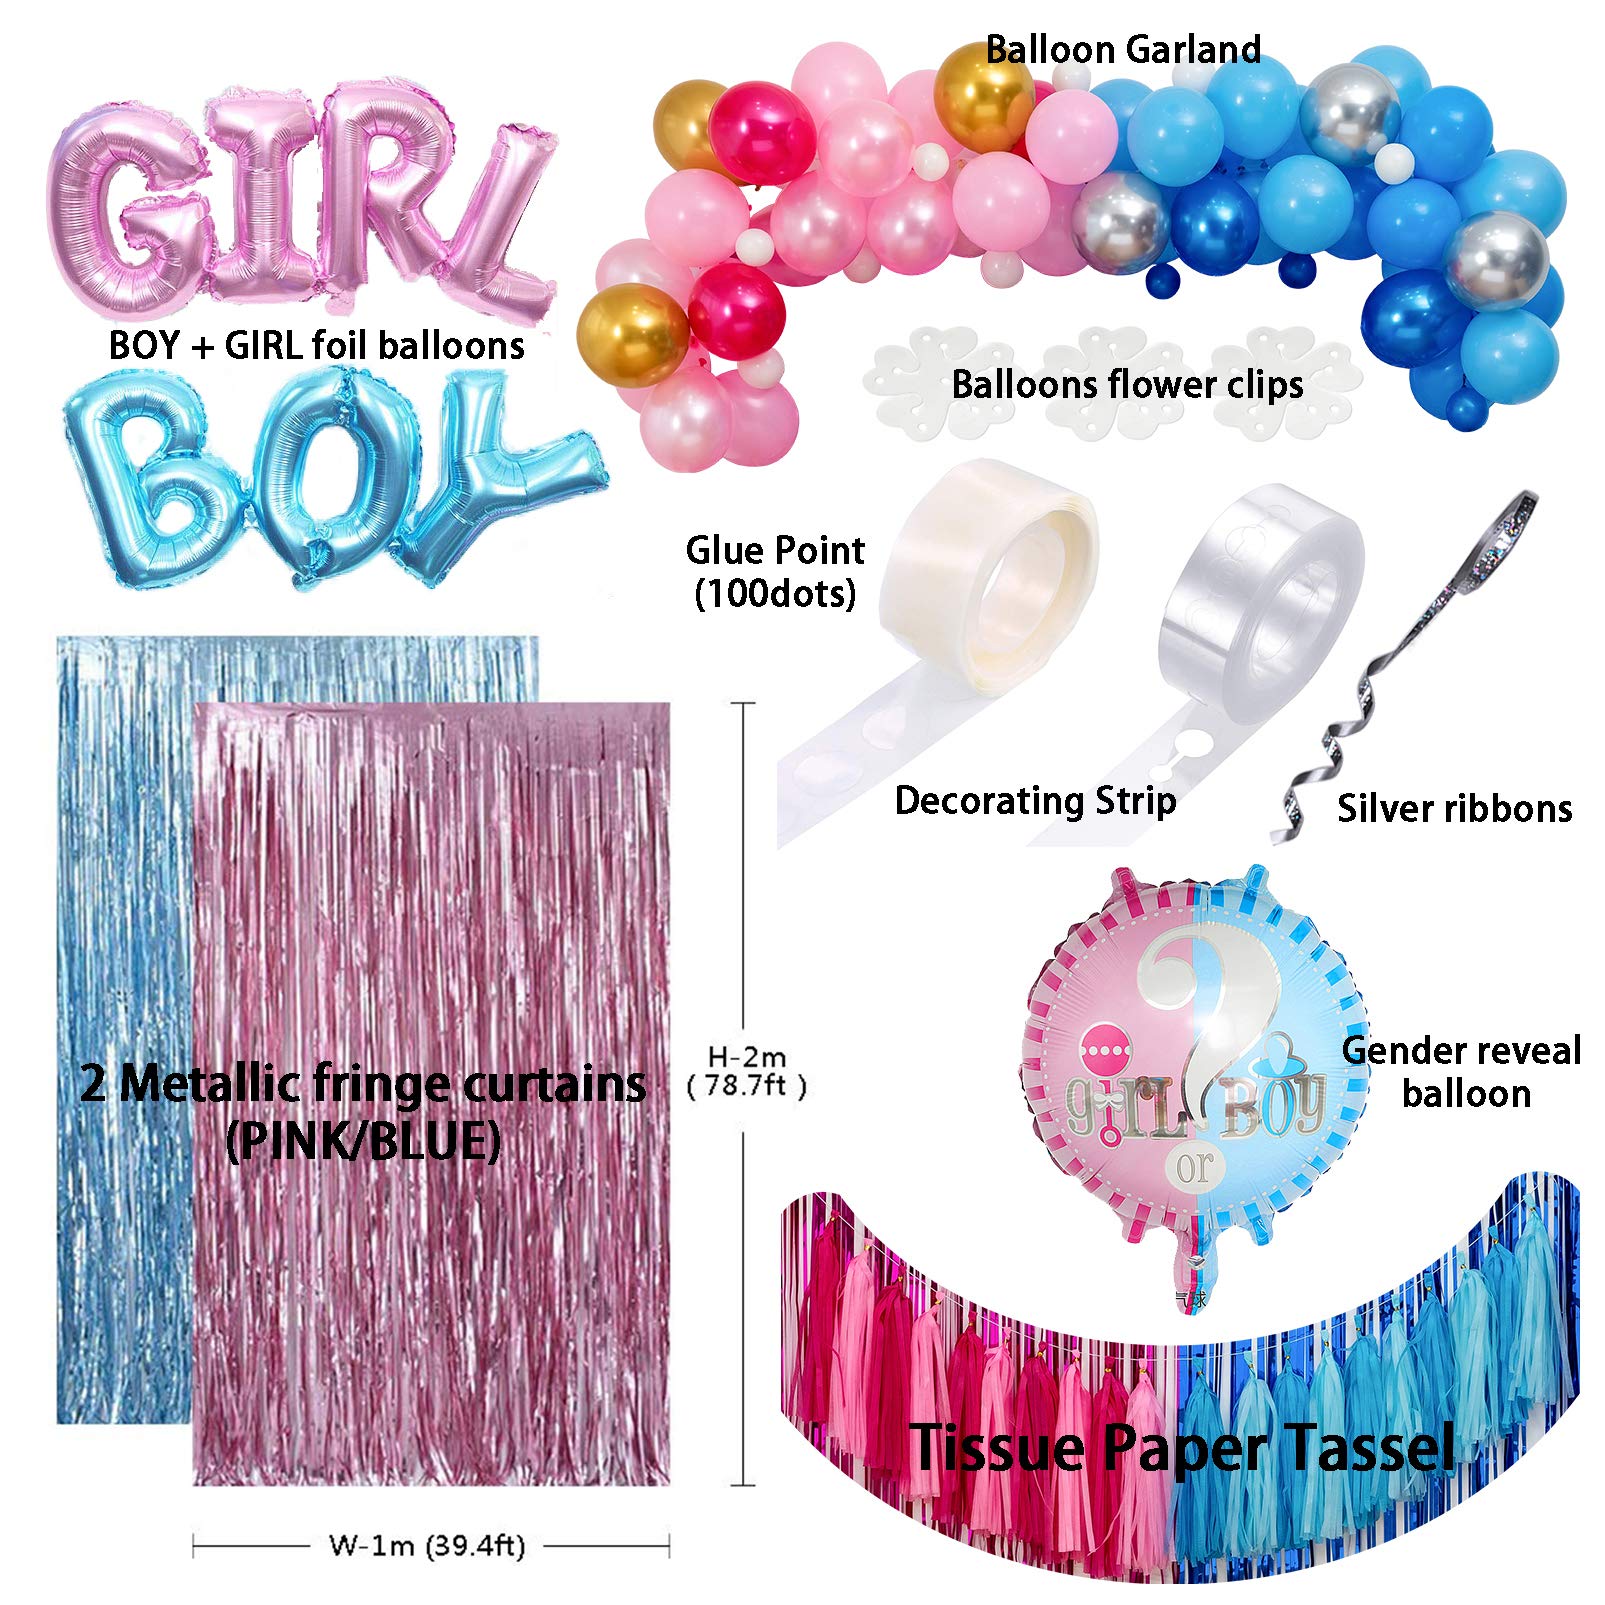 Boy Or Girl Gender Reveal Party Decoration Set,&Balloons Arch Garland Kit,Foil Balloons,Curtains,Paper tassel Garland,Balloon decoration tools,For Party Photo Backdrop (Pink/Blue) Shower Birthday